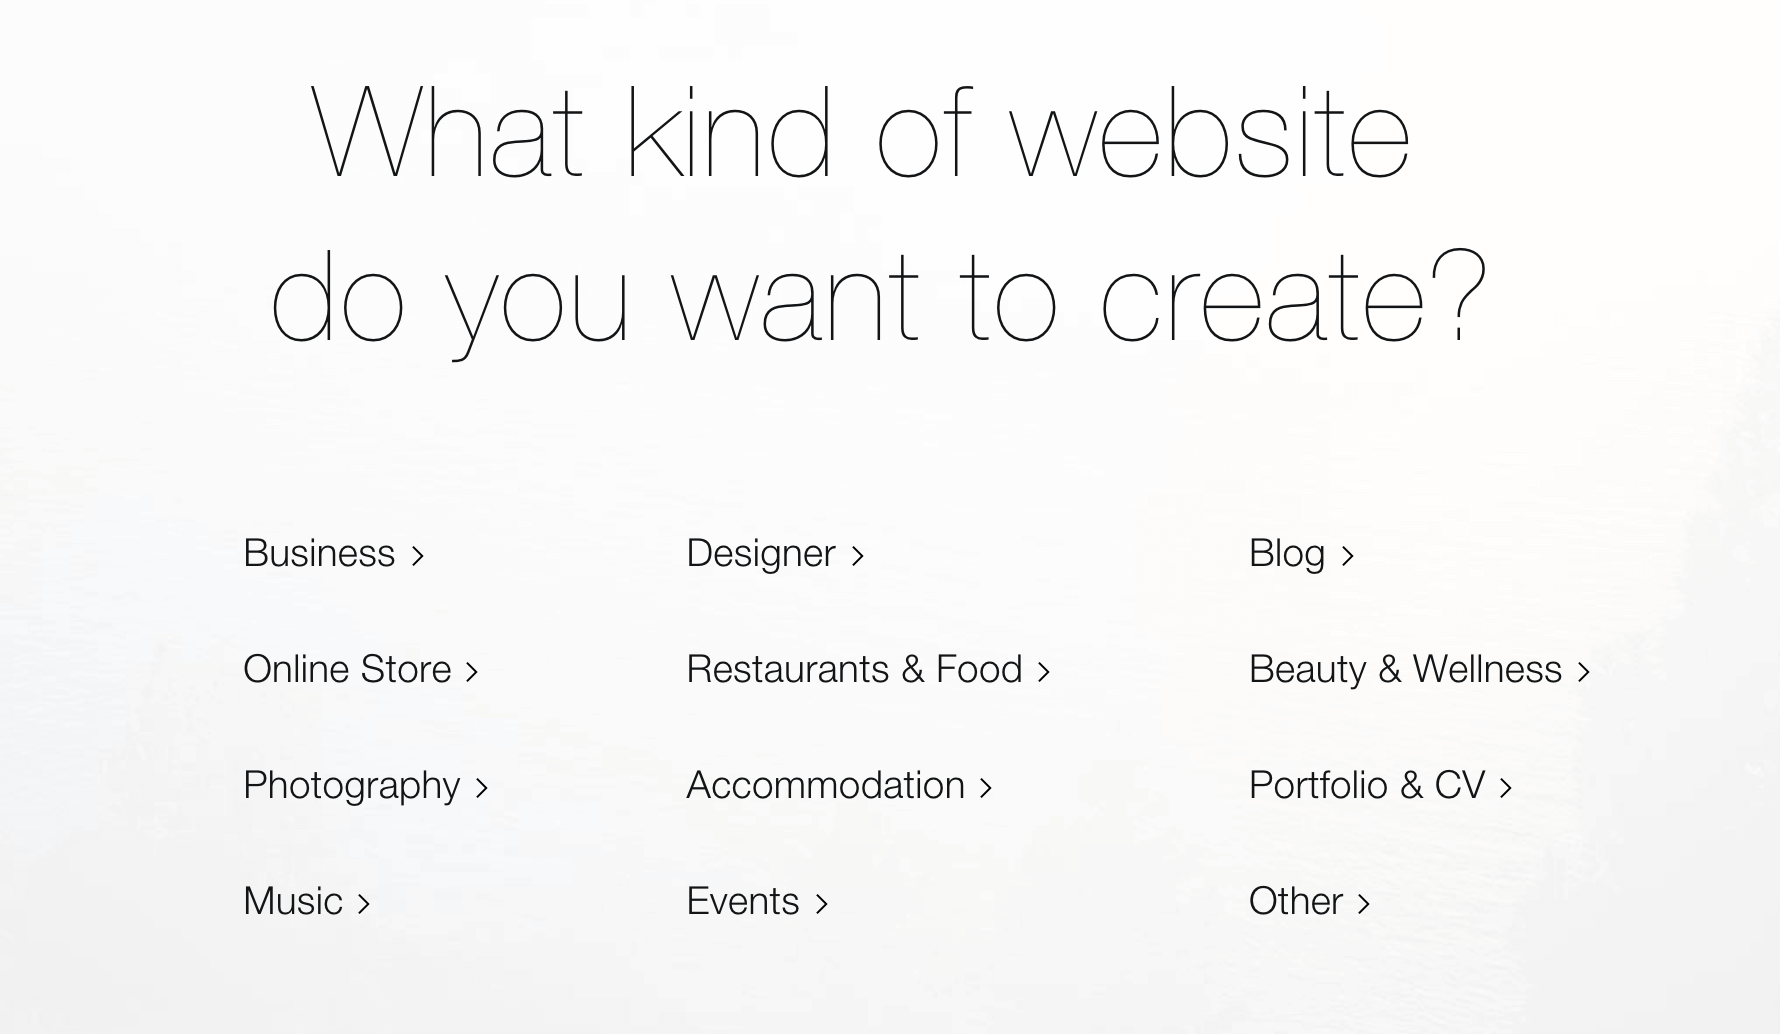 Choosing which type of page to create in Wix.